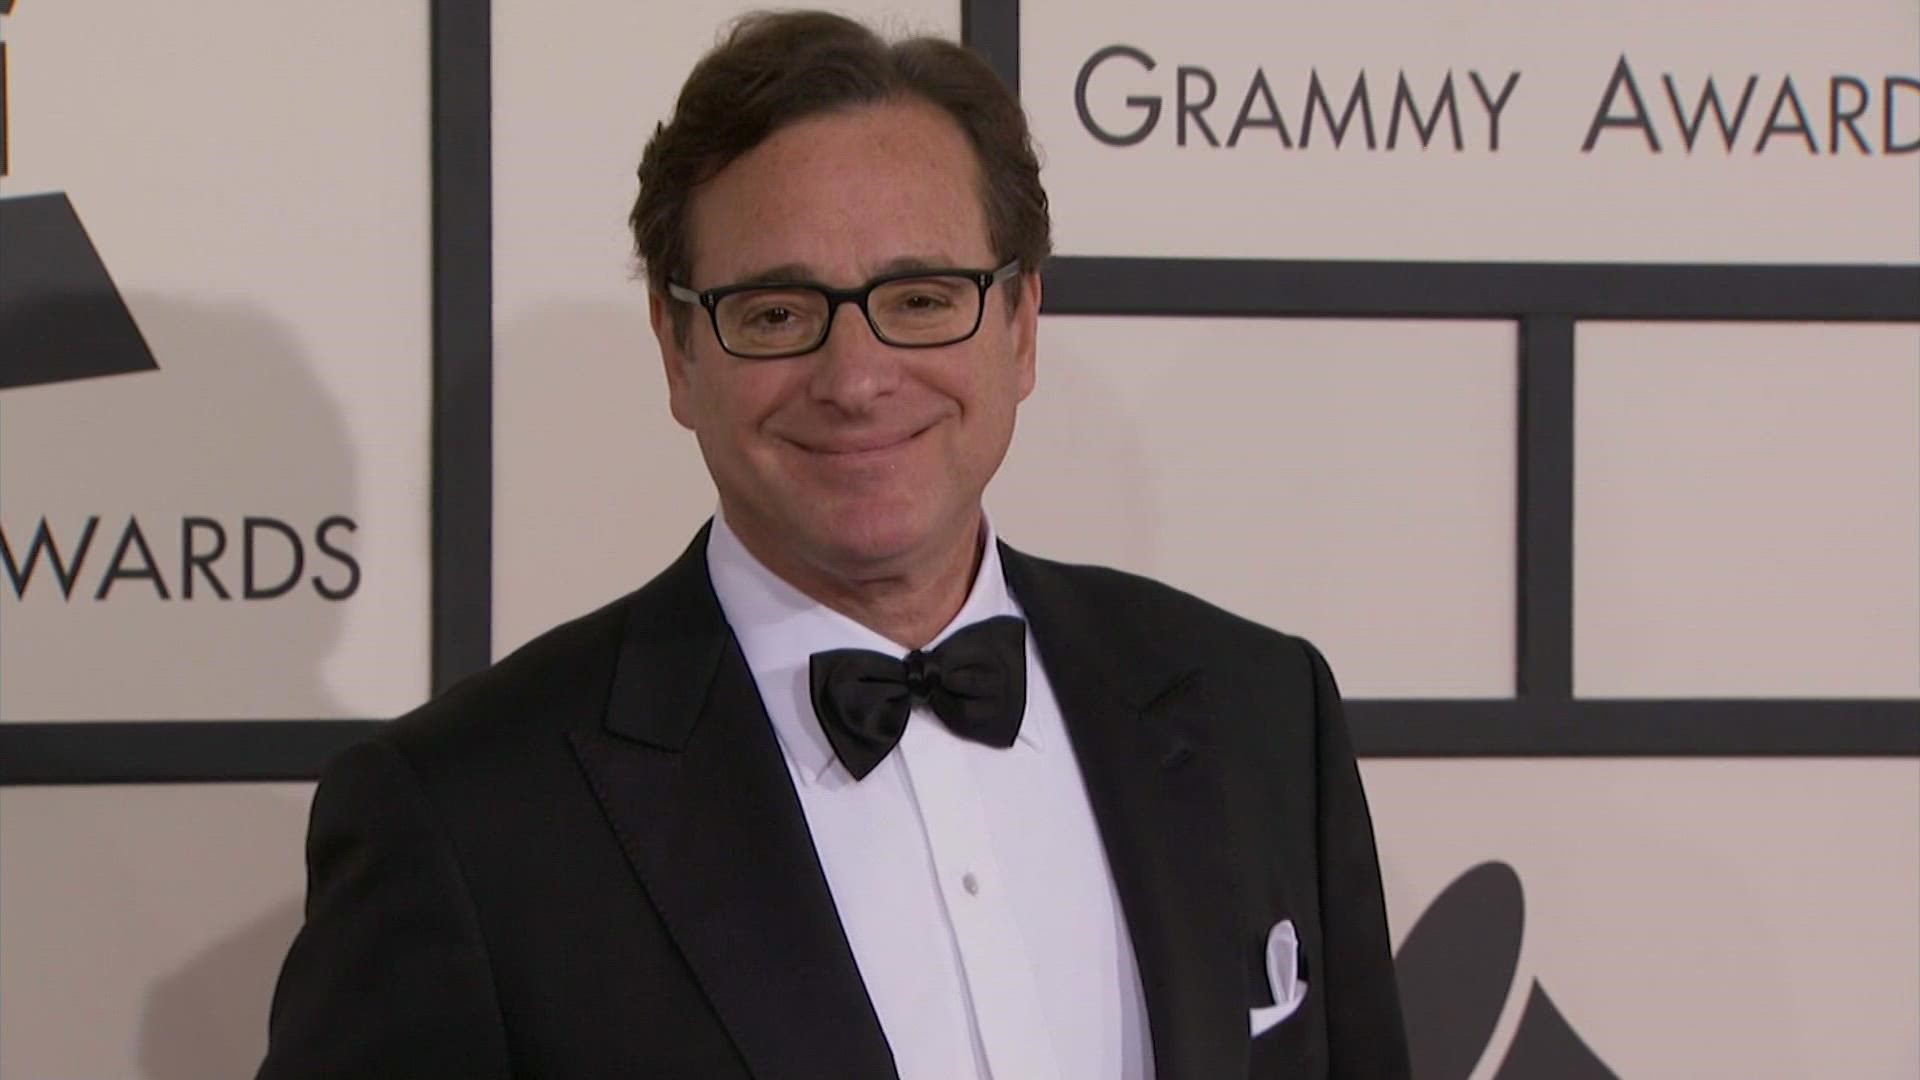 The iconic actor was best known for his role as Danny Tanner on "Full House."